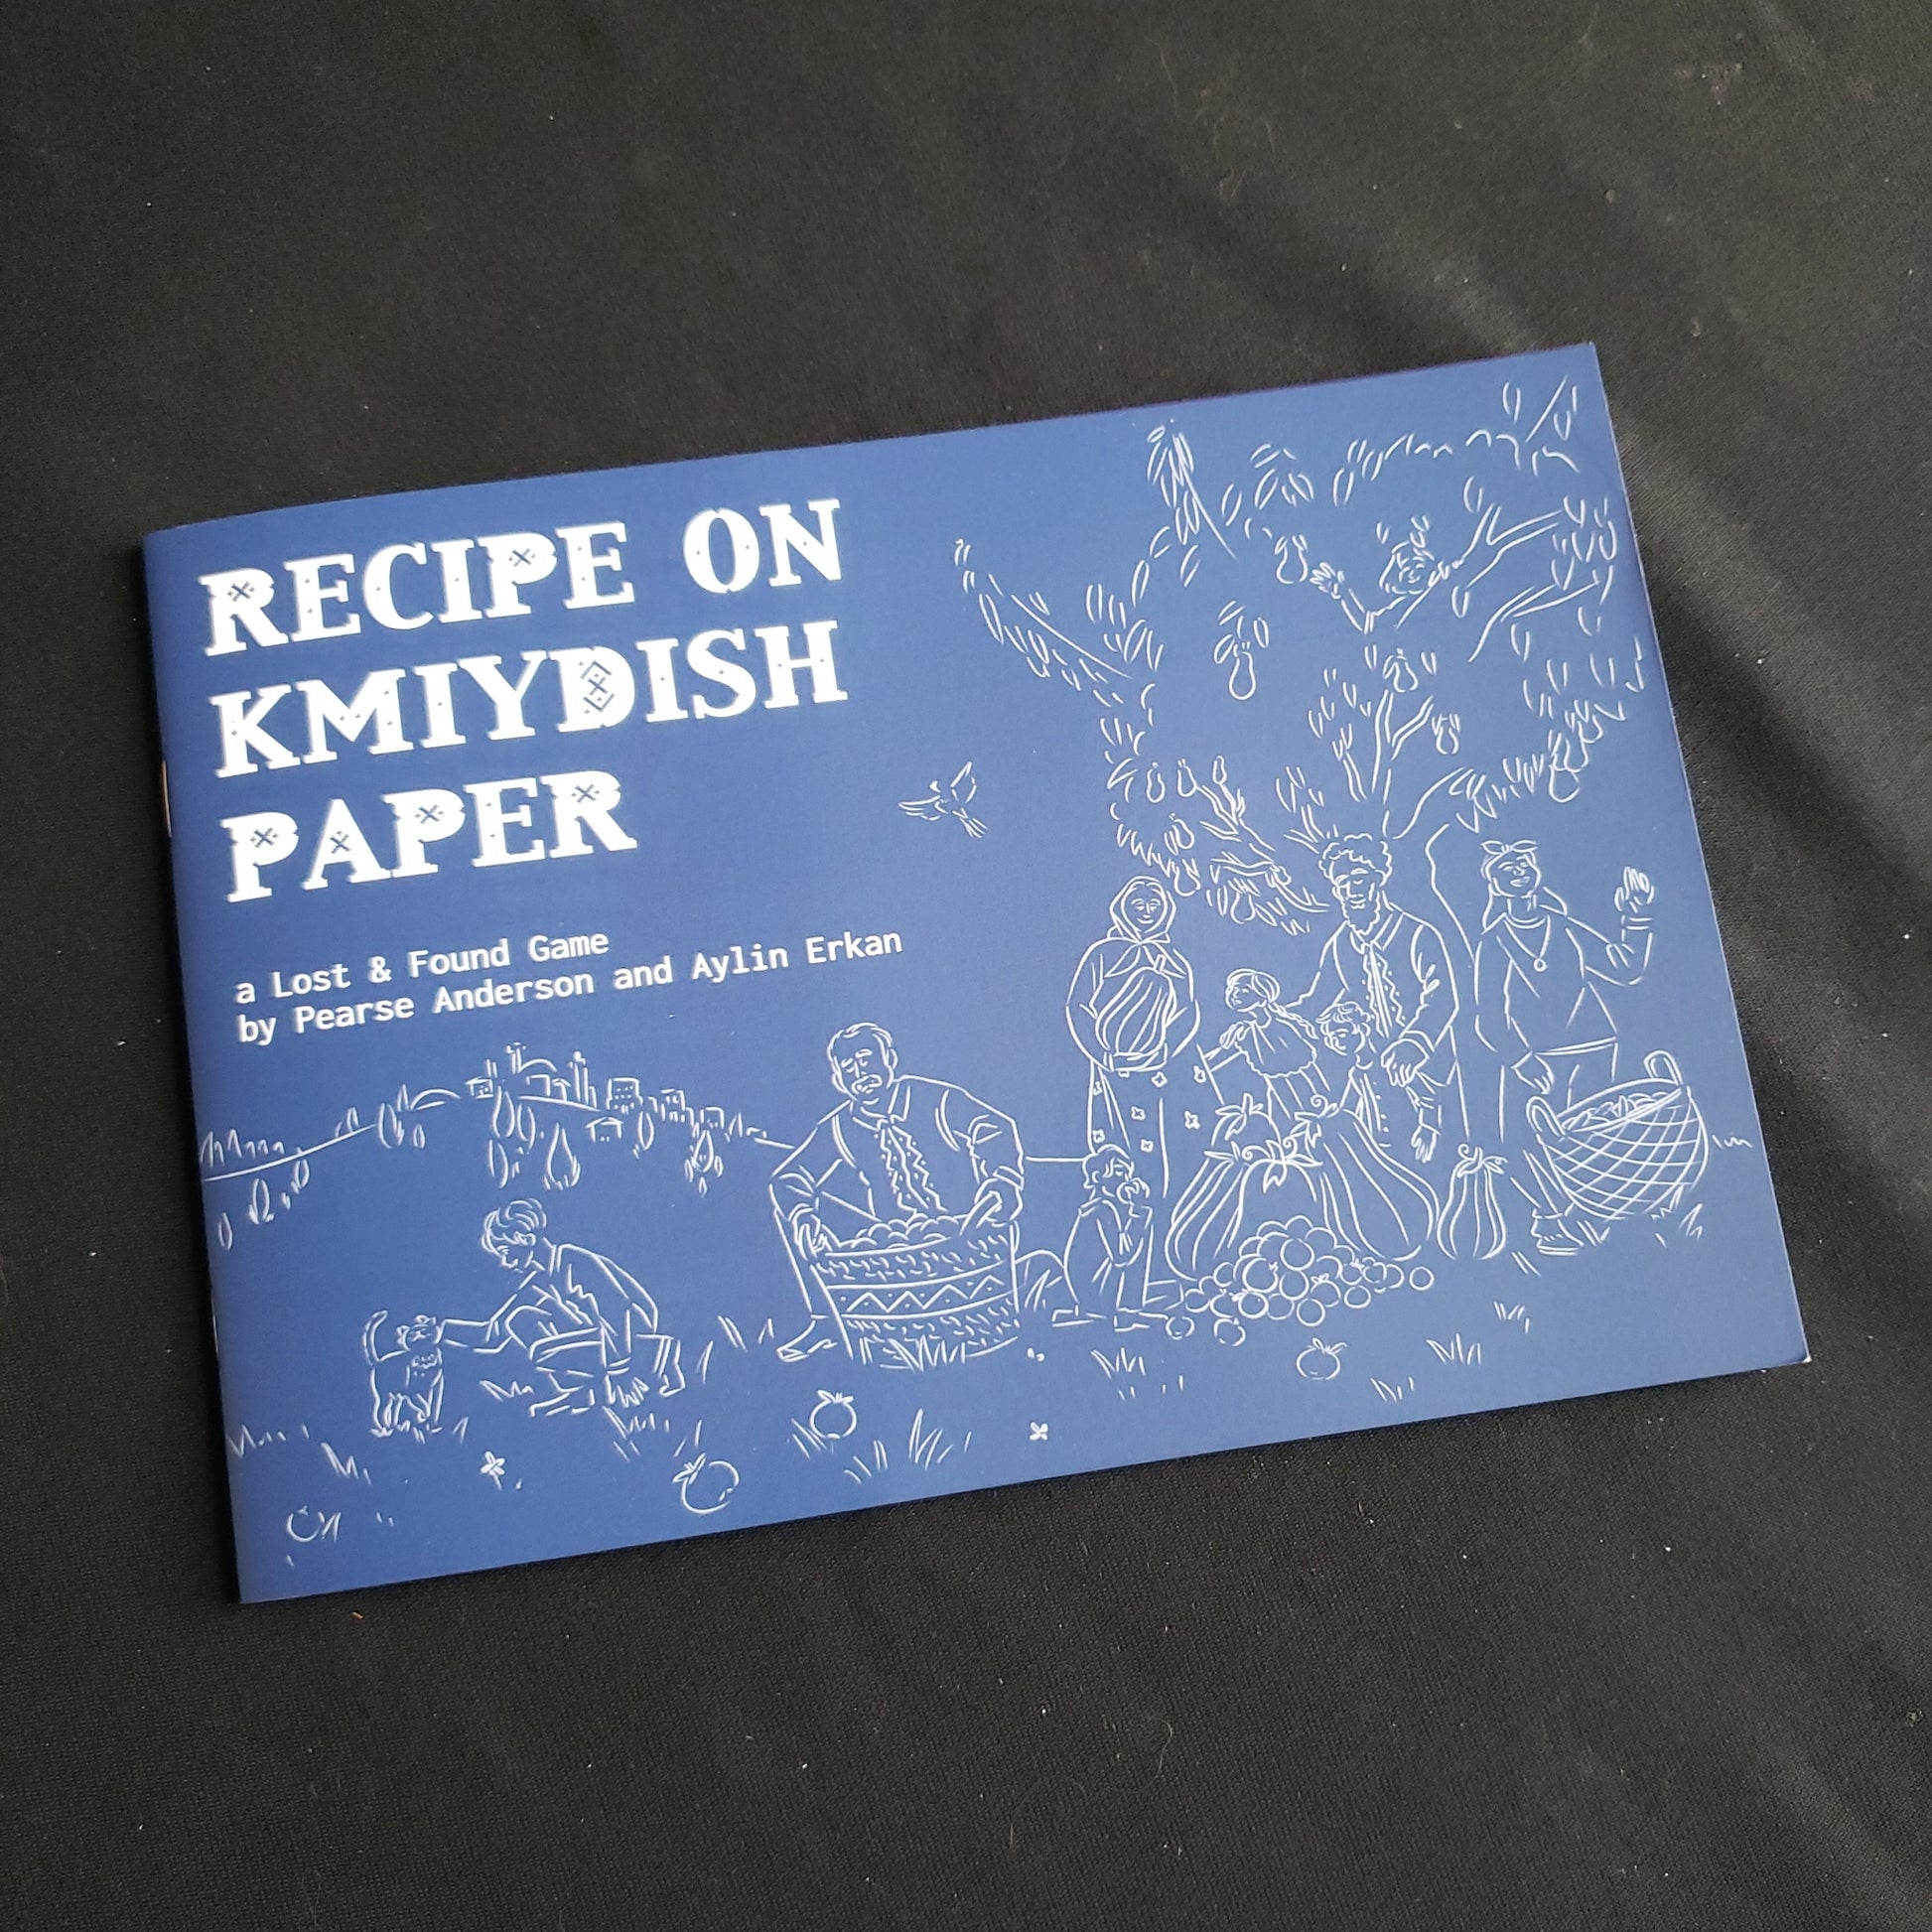 Image shows the front cover of the Recipe on Kmiydish Paper roleplaying game book